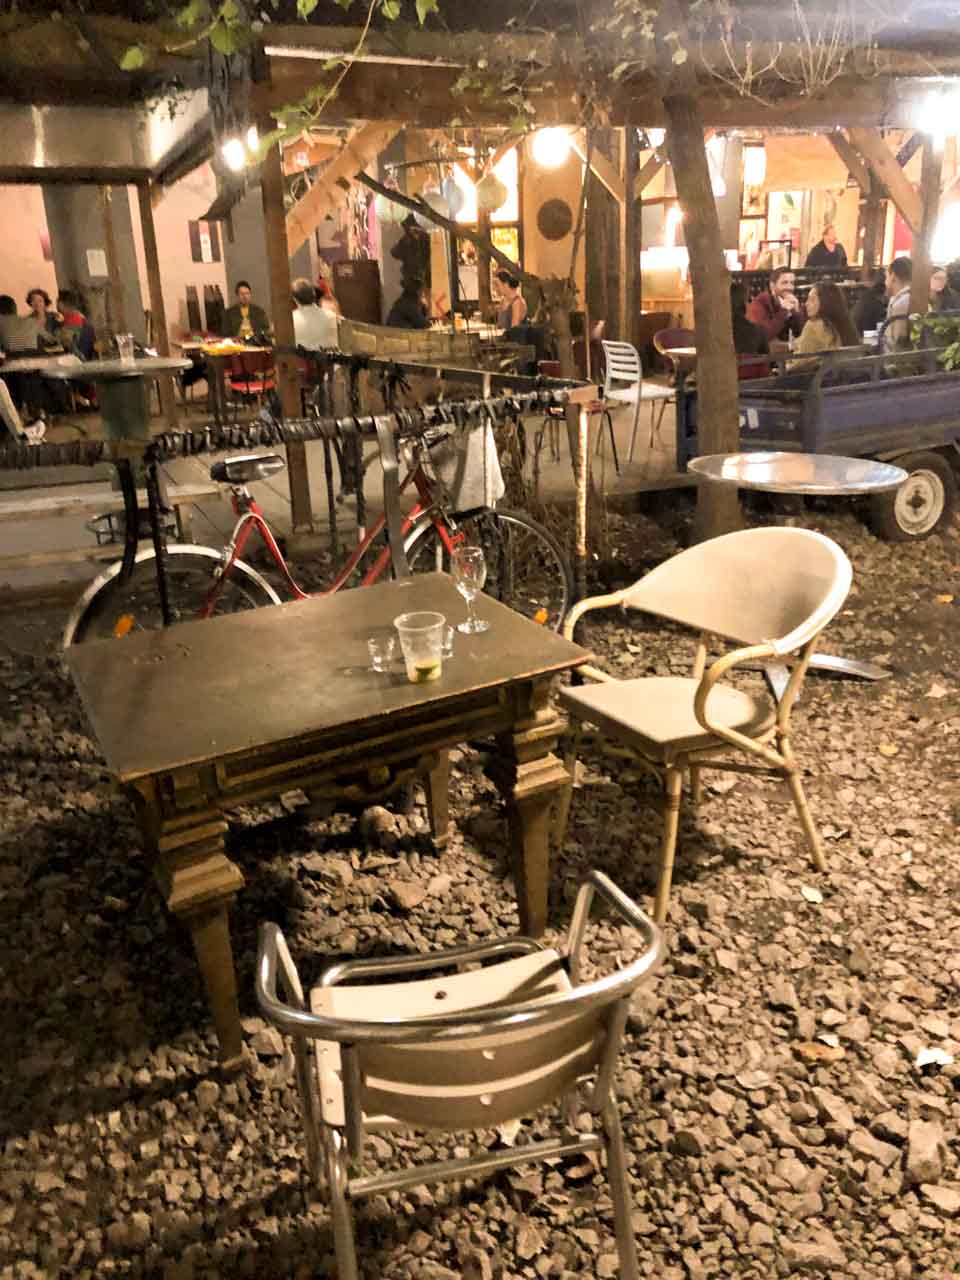 A table with chairs at Grandio Jungle Bar, a ruin bar in Budapest, Hungary